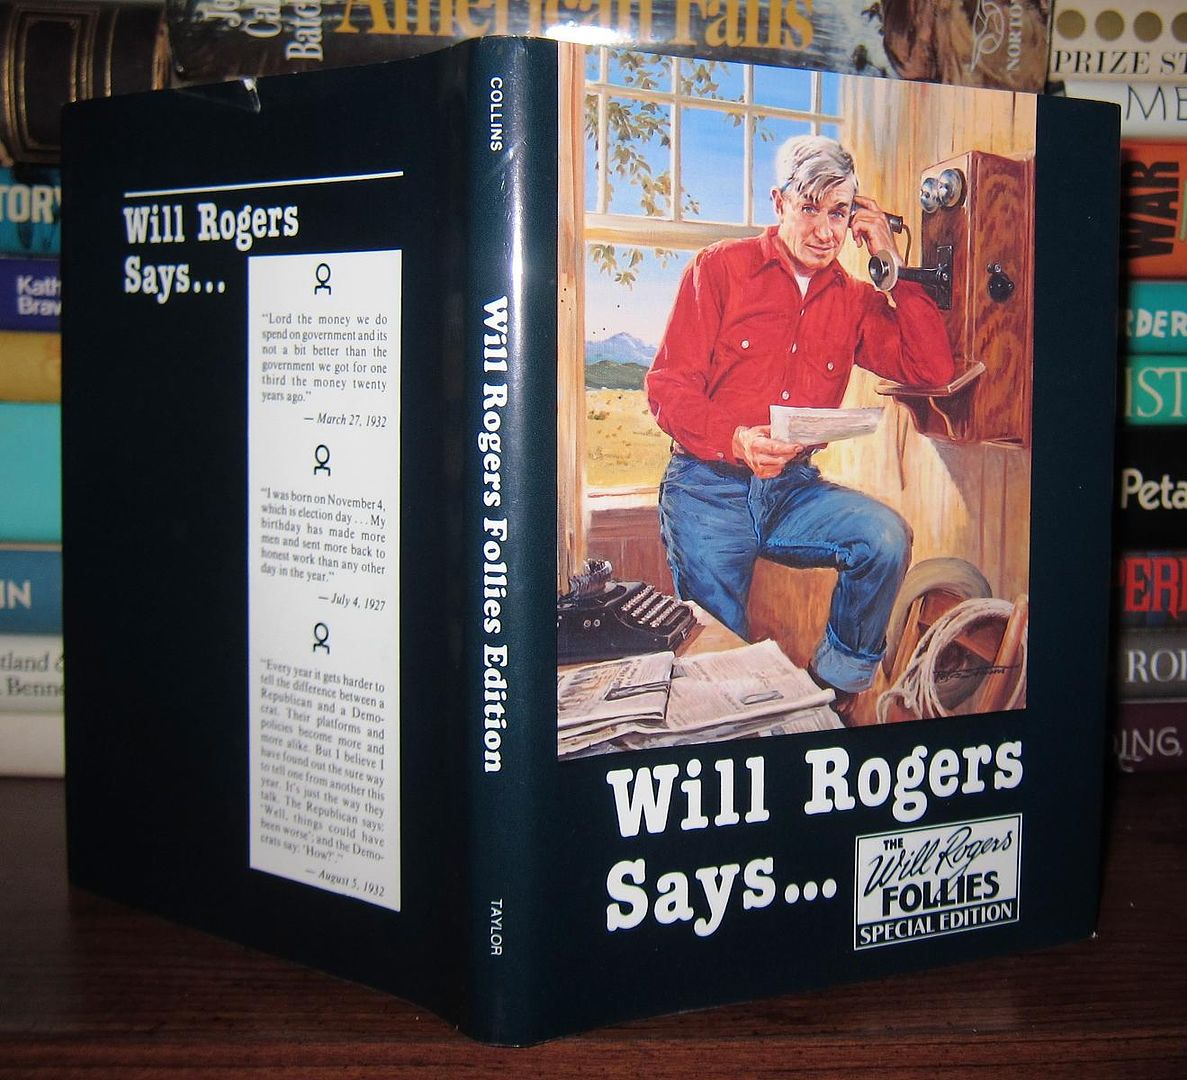 ROGERS, WILL; COLLINS, REBA NEIGHBORS - Will Rogers Says Follies Special Edition